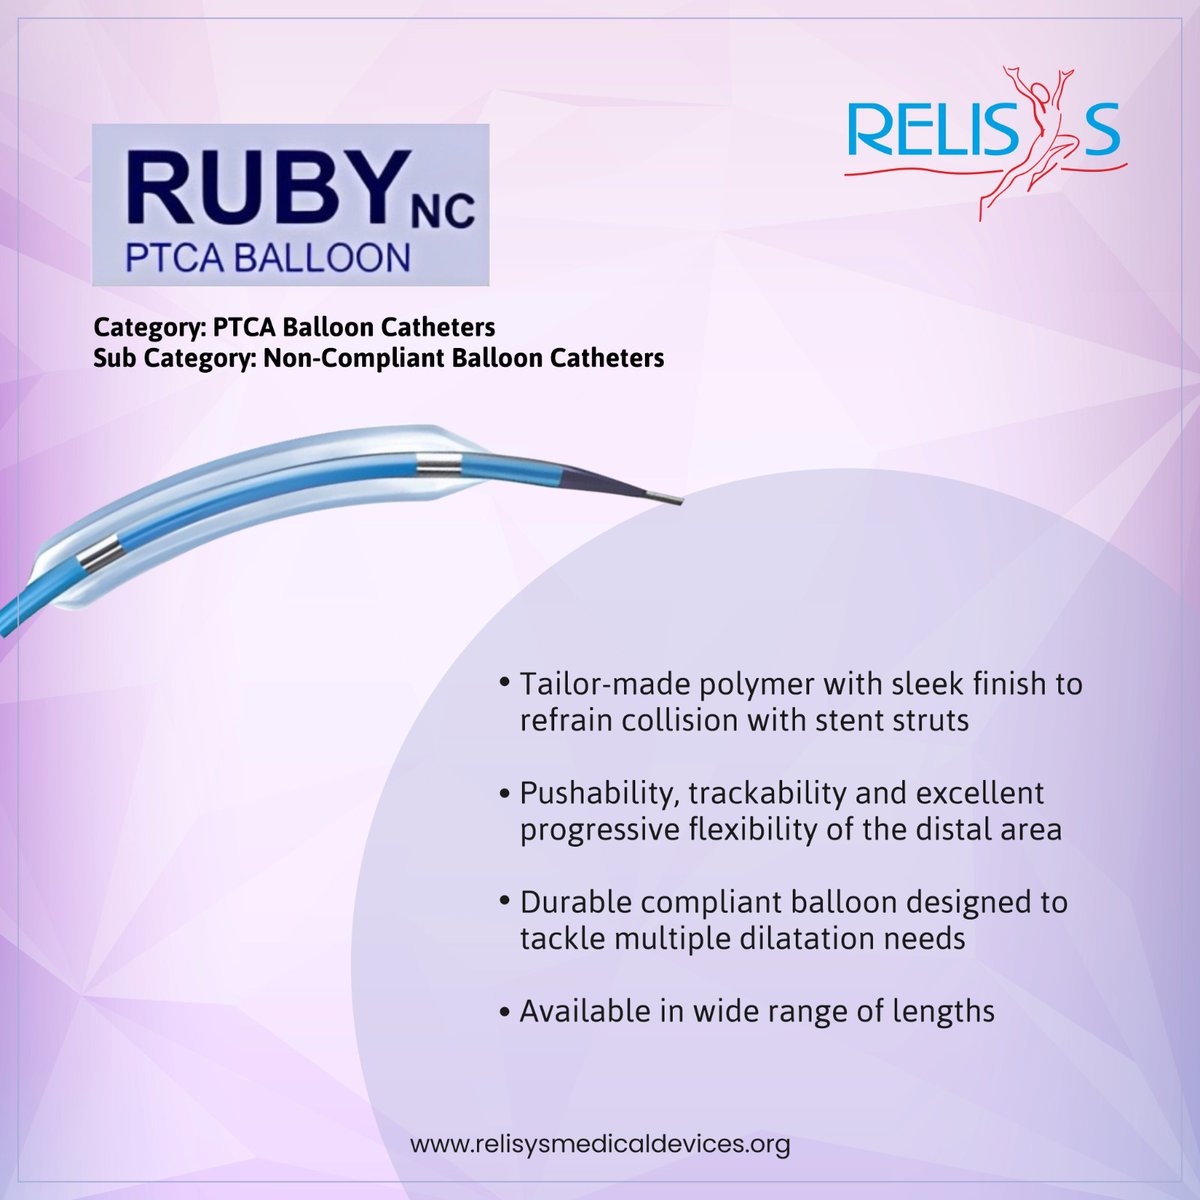 #RUBY NC: #Non_Compliant #PTCABalloon #Catheter #ruby #ptcaballooncatheter #postdilatationcatheter #relisysmedicaldevices #cardiology #catheter @relisysmedical For more details, visit: rb.gy/4xdvdq please drop us an email at: info@relisysmedicaldevices.org